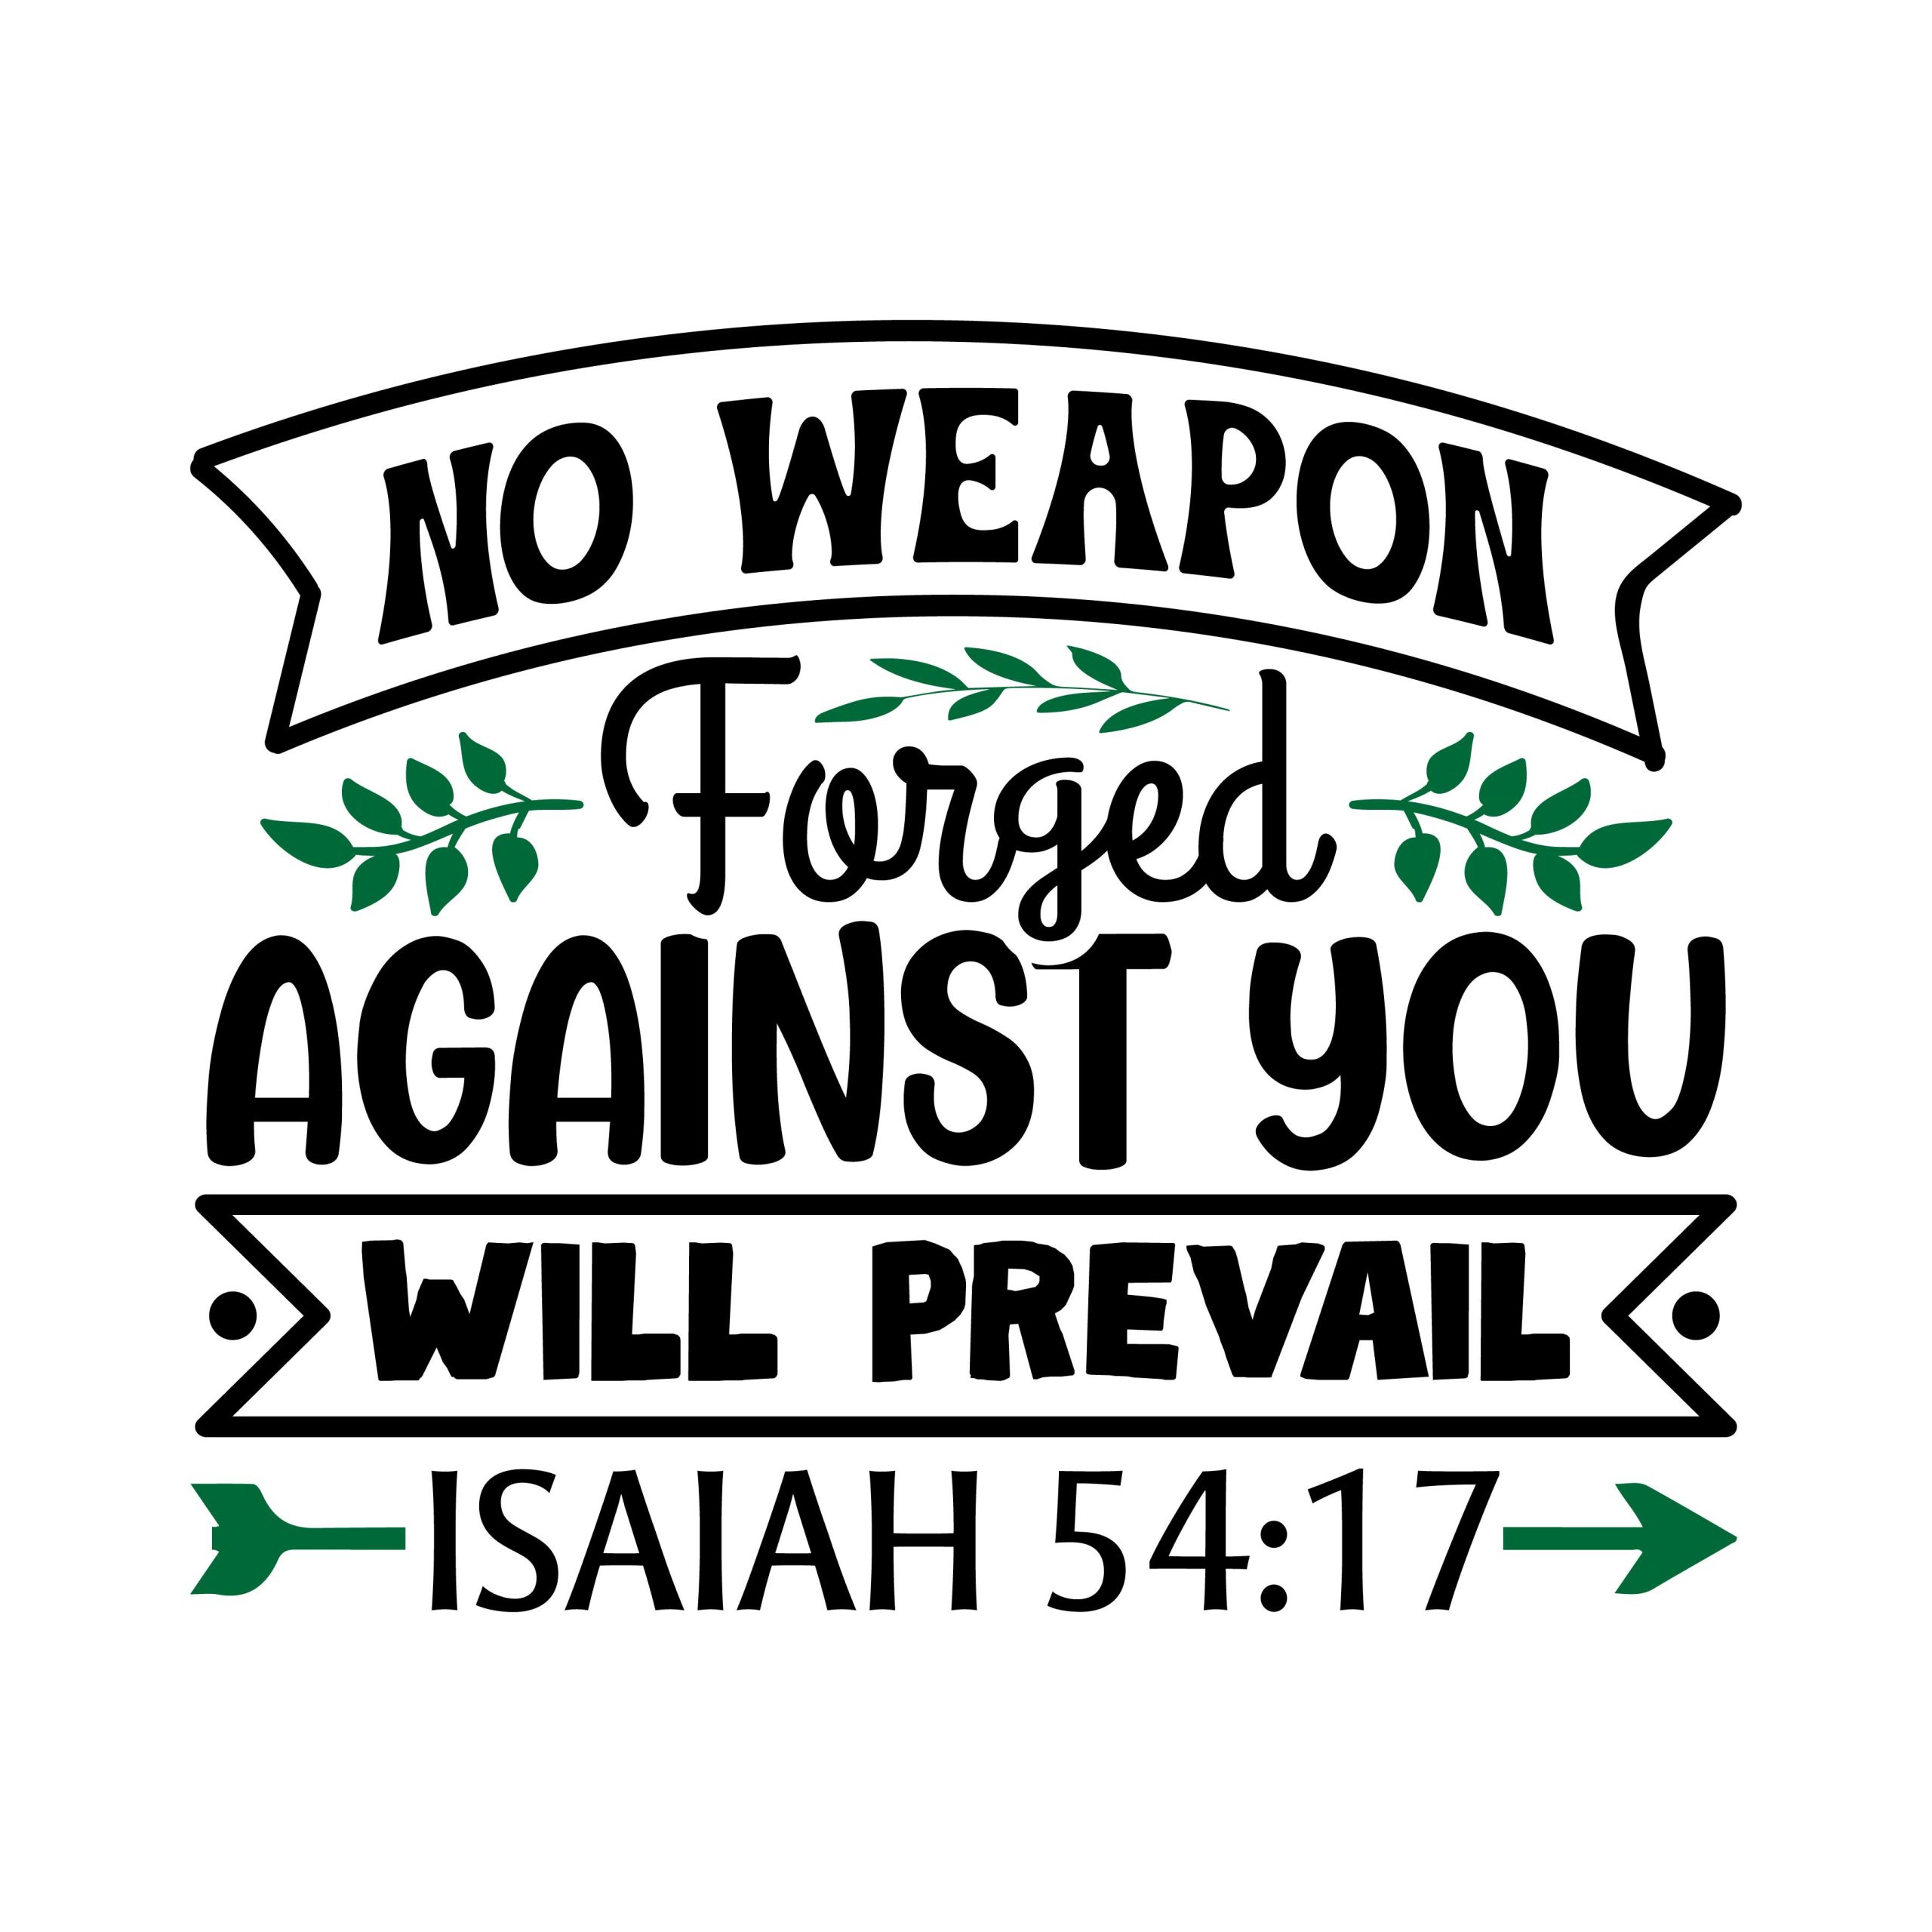 No weapon forged against you will prevail Isaiah 54:17, bible verses, scripture verses, svg files, passages, sayings, cricut designs, silhouette, embroidery, bundle, free cut files, design space, vector